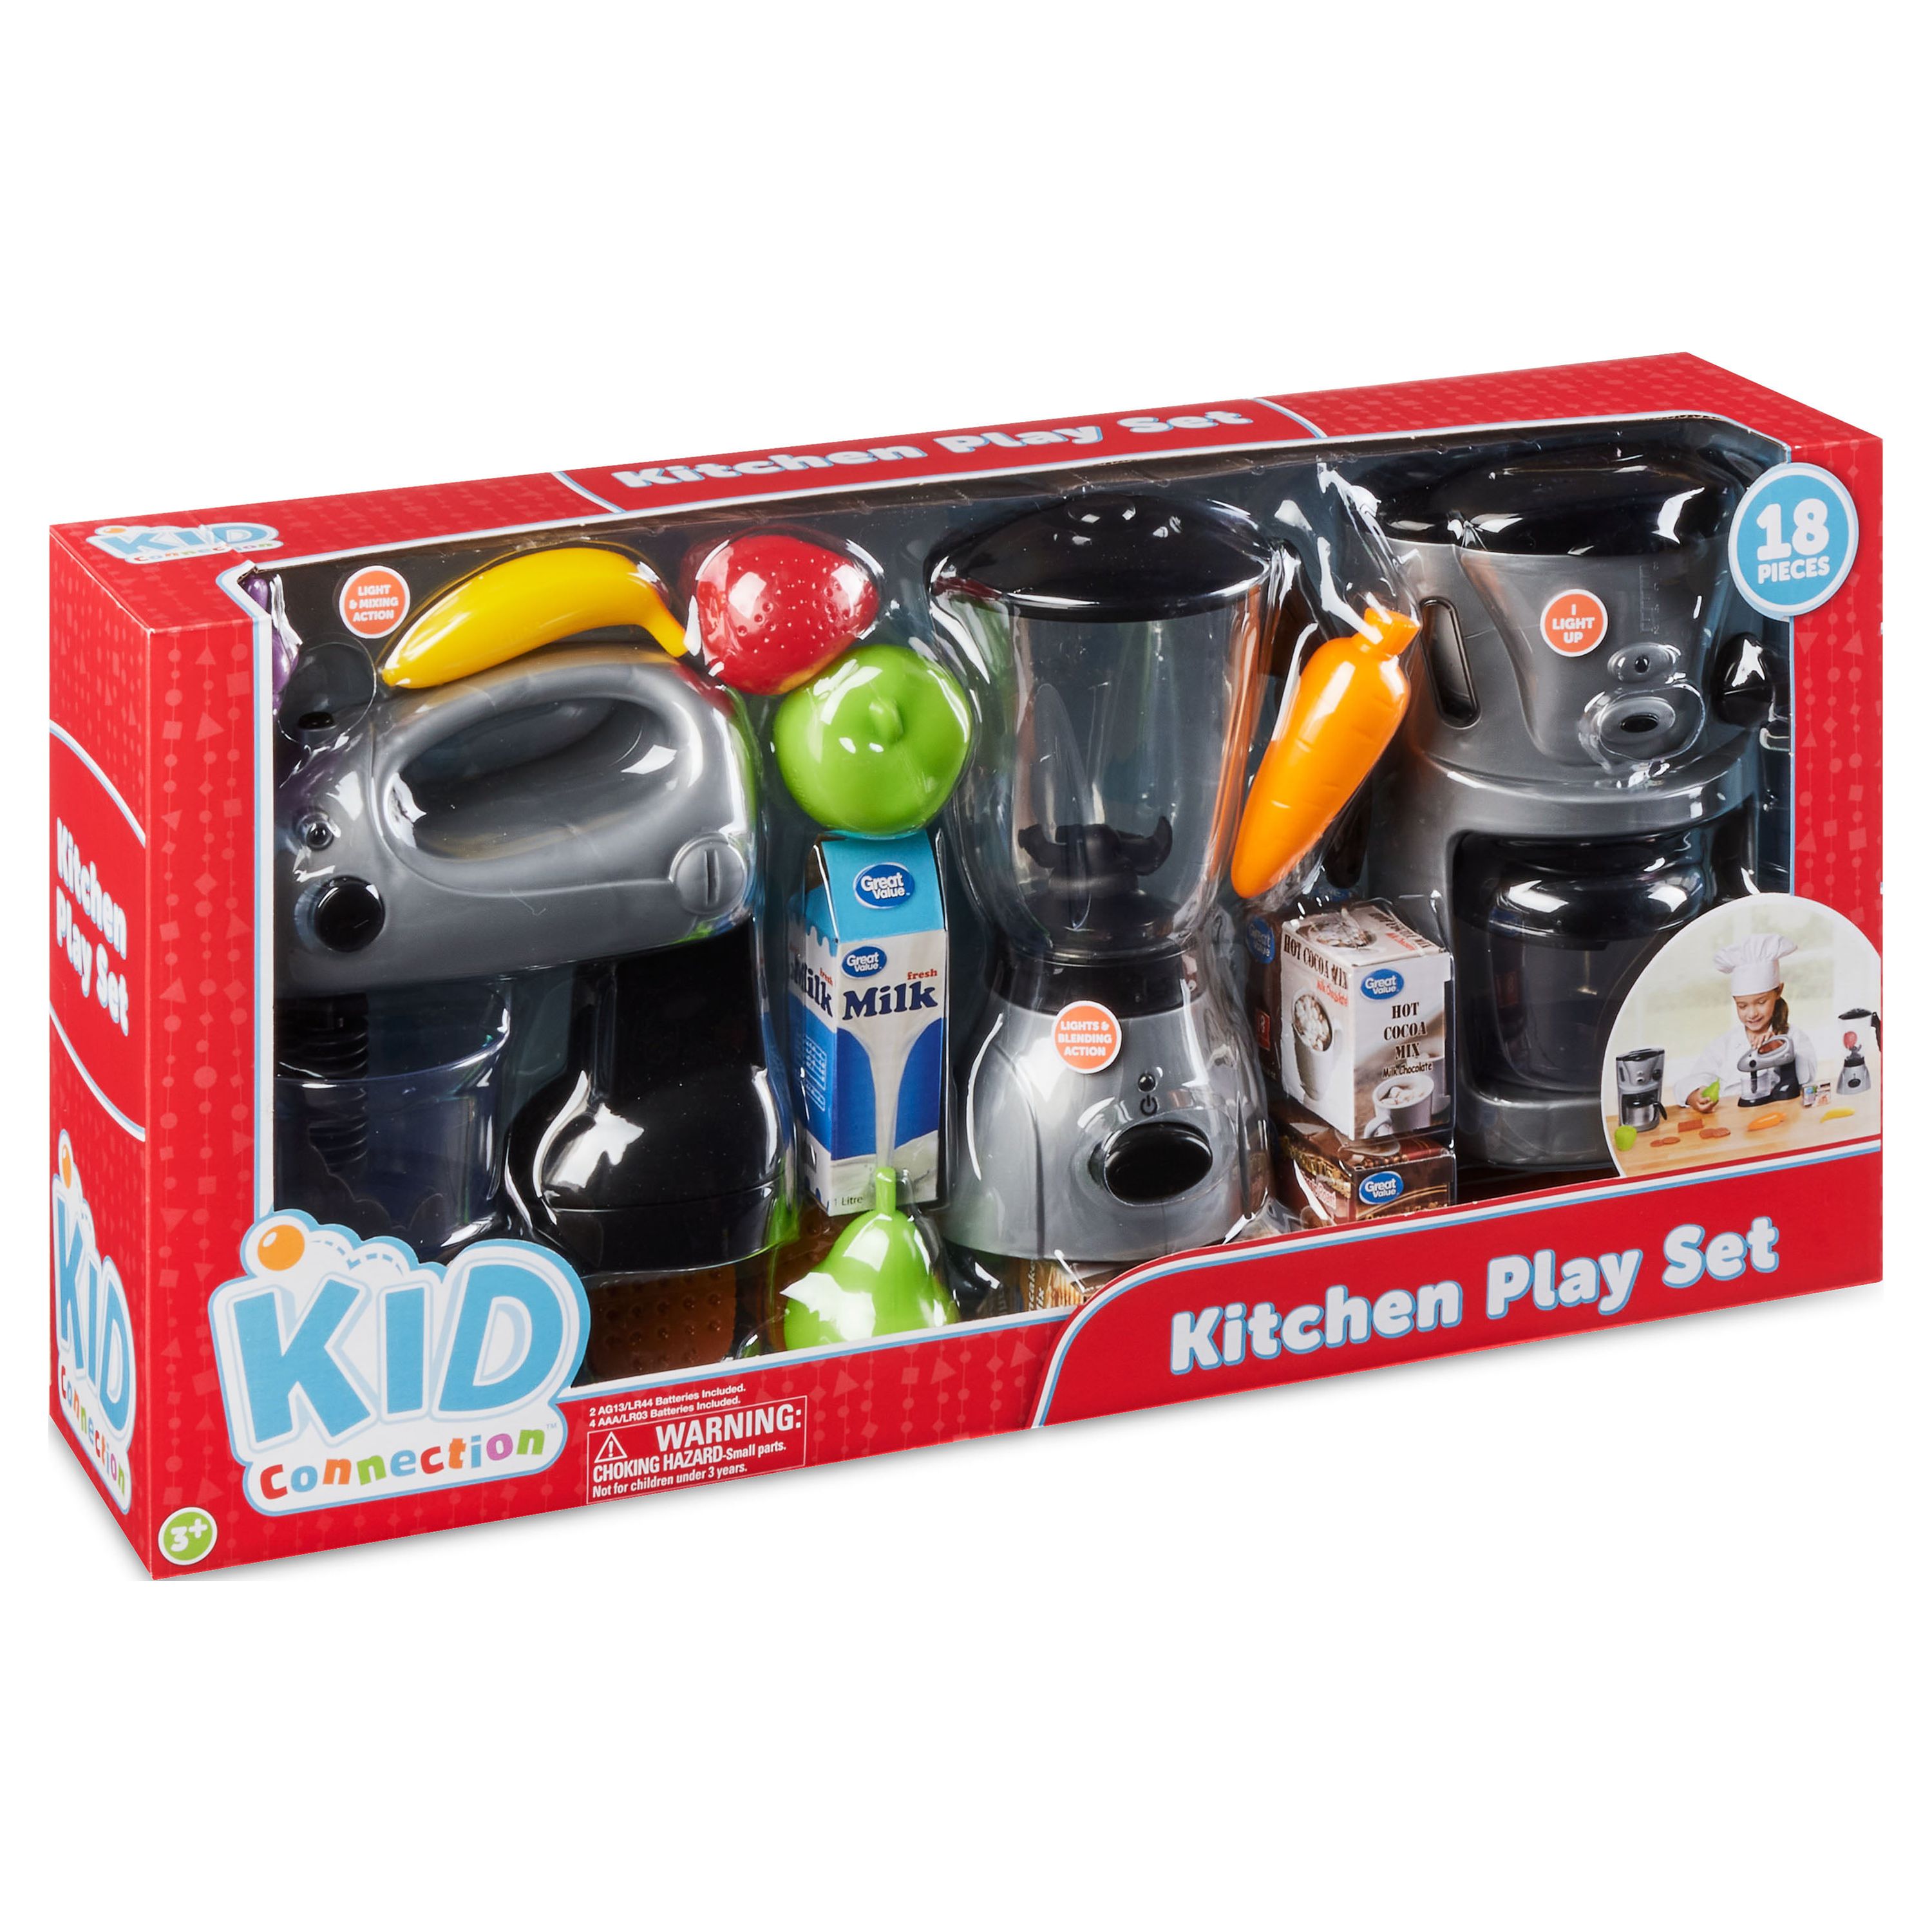 Kid Connection Kitchen Play Set, 18 Pieces - image 2 of 5